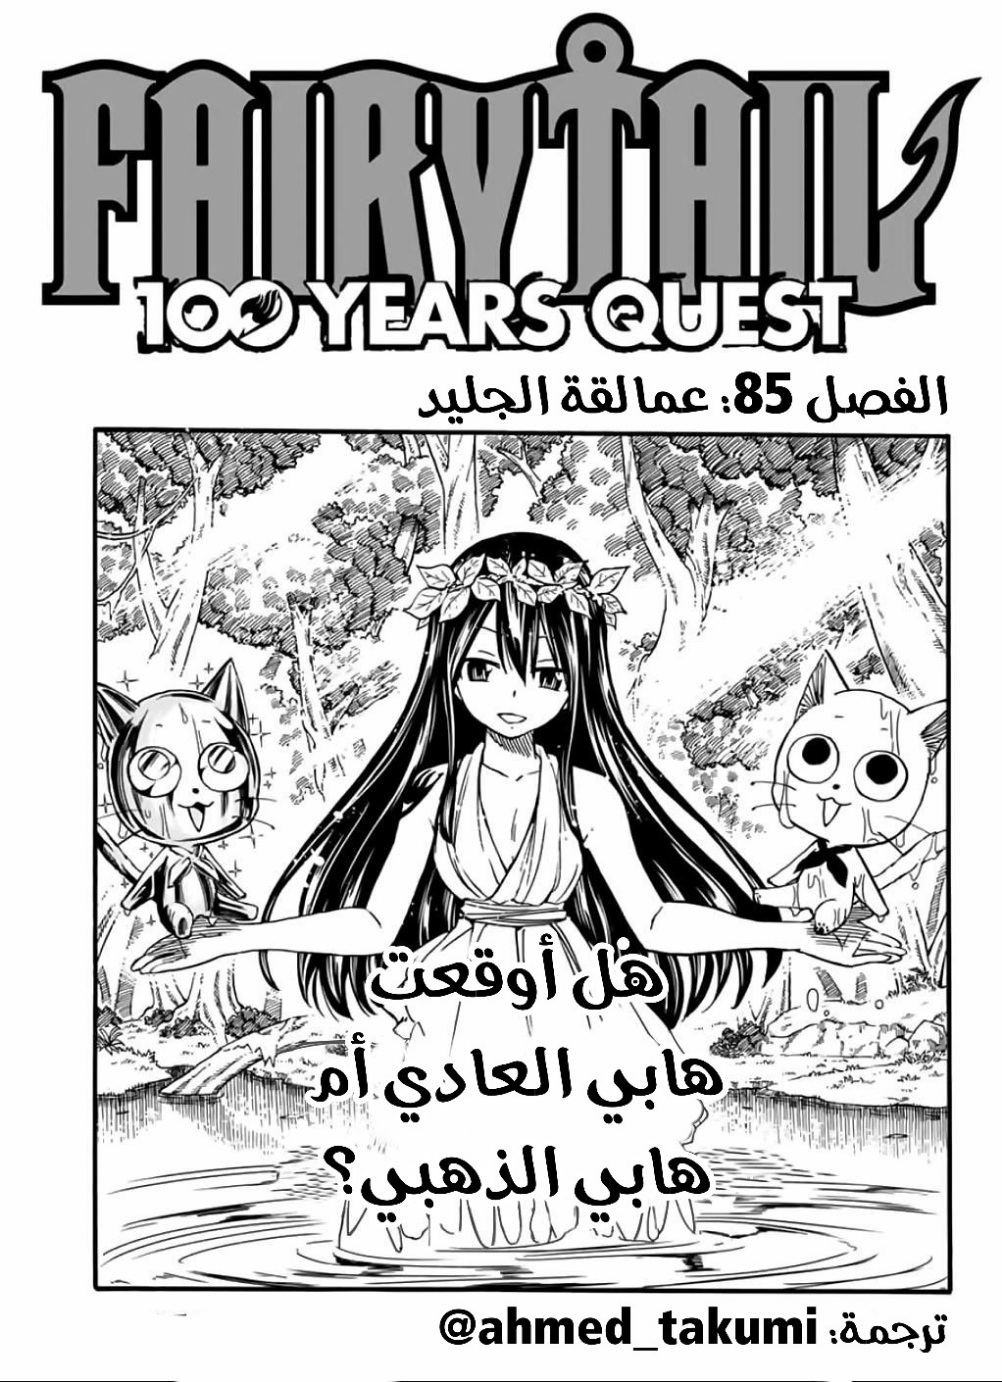 Fairy Tail 100 Years Quest: Chapter 85 - Page 1